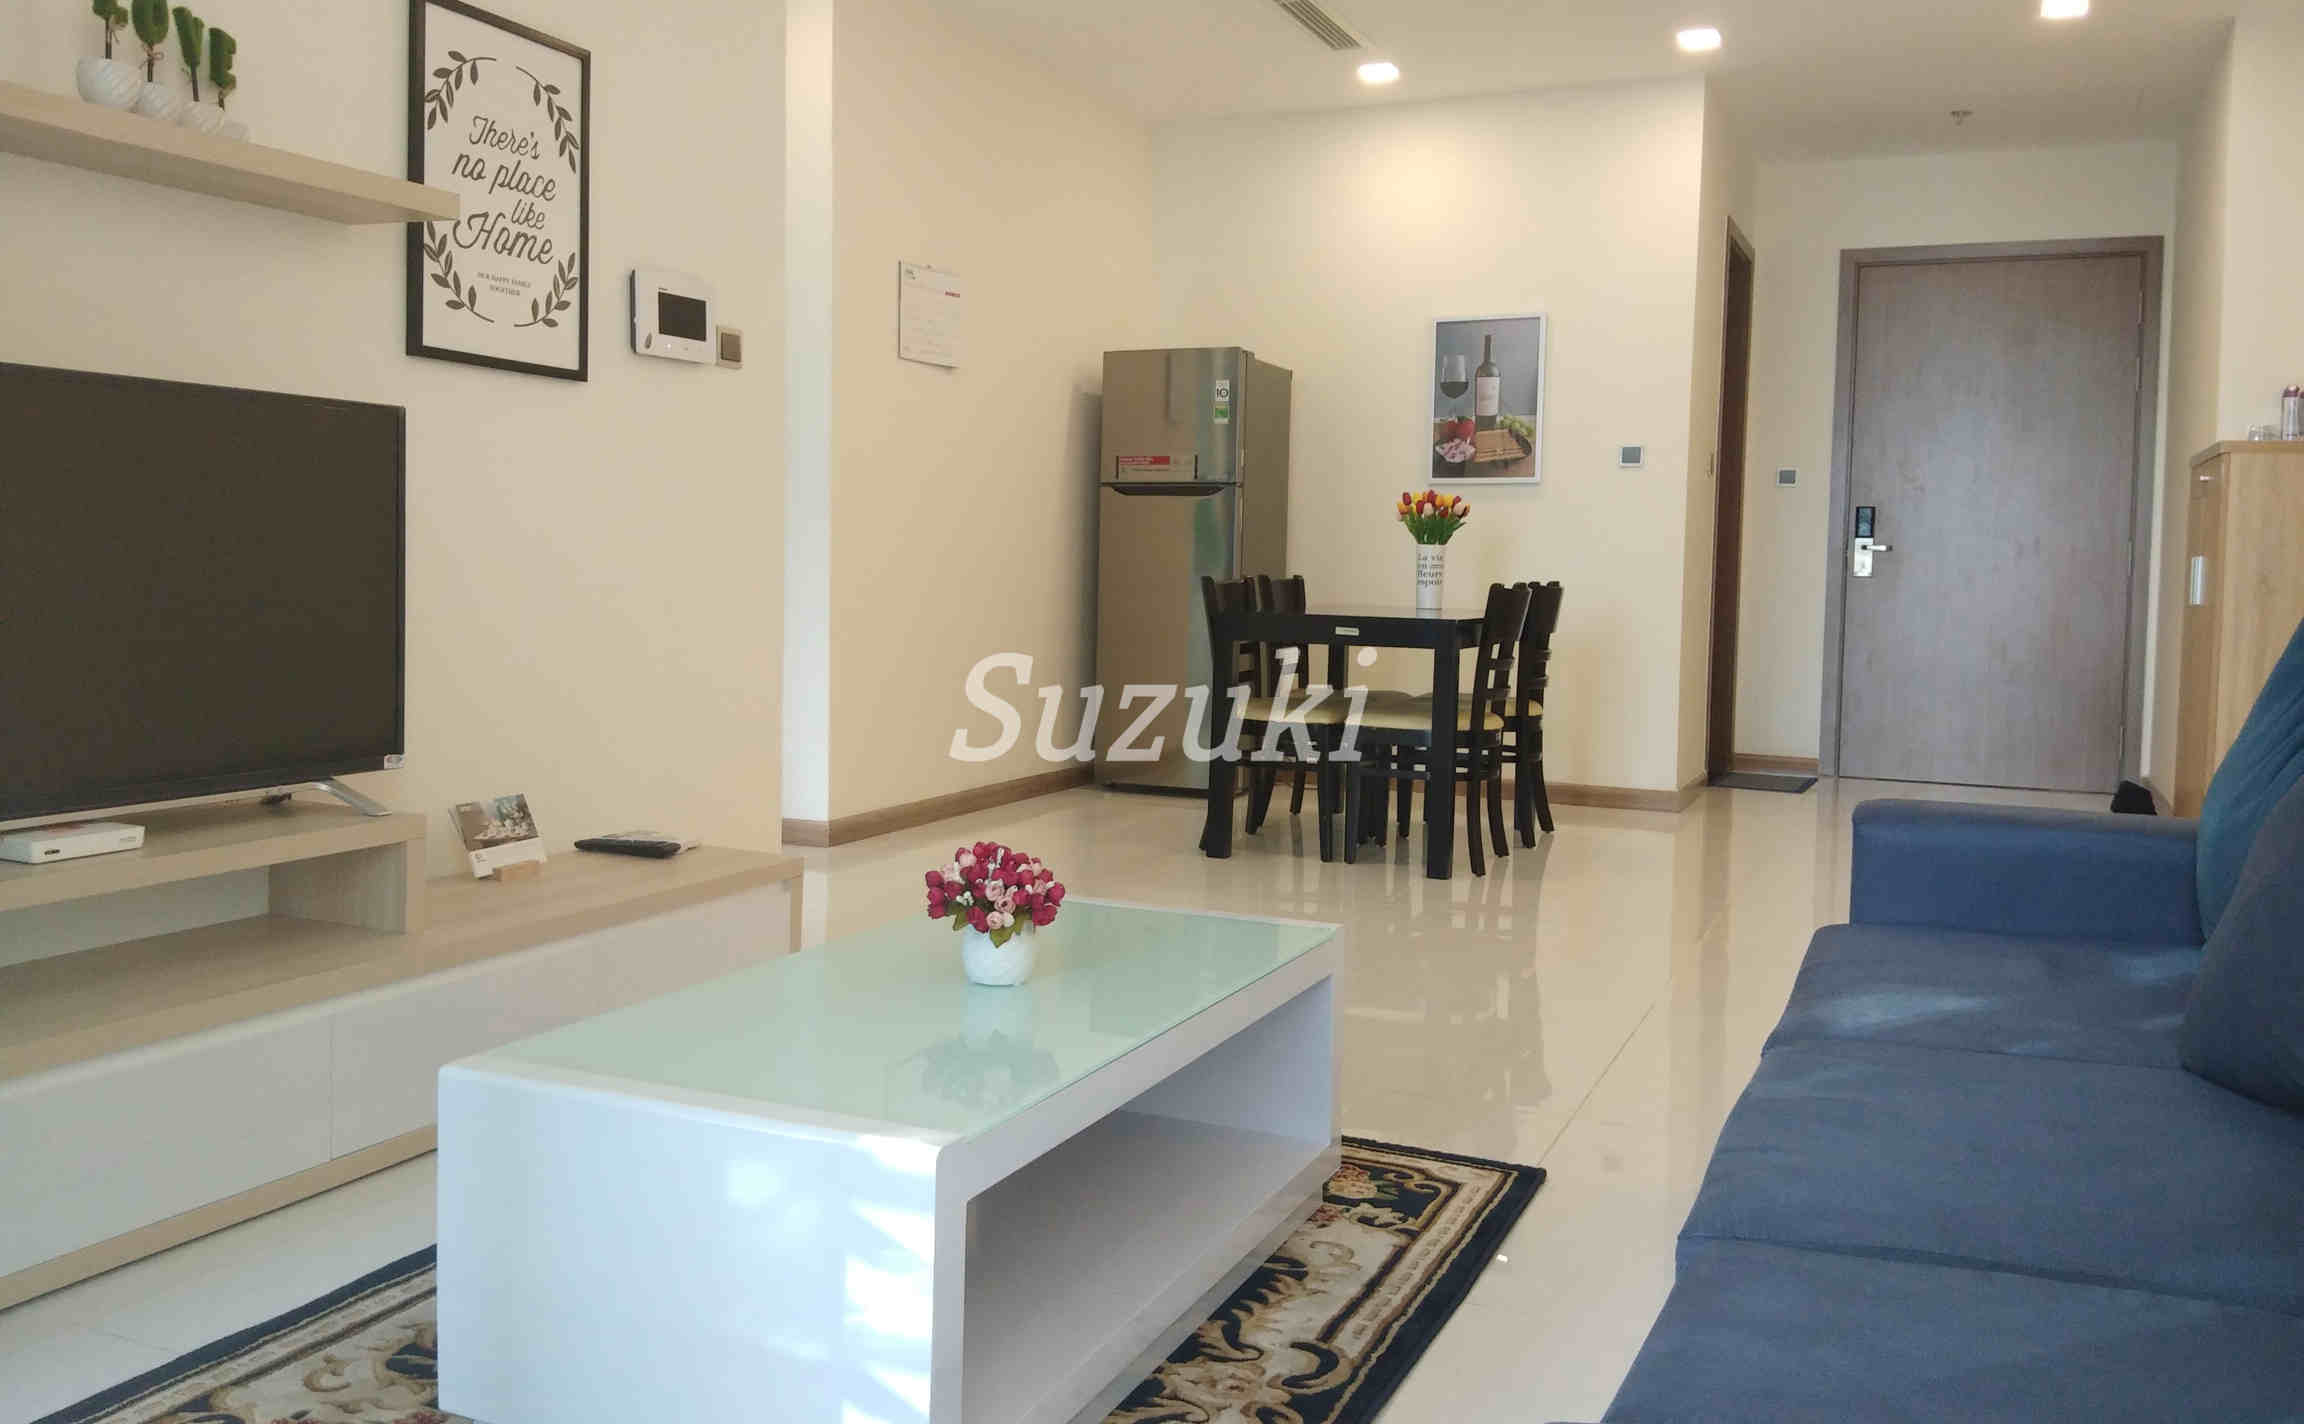 2LDK rental 80 square meters-1200$-ST105P1433 | Binhomes Central Park, apartment with gym and pool